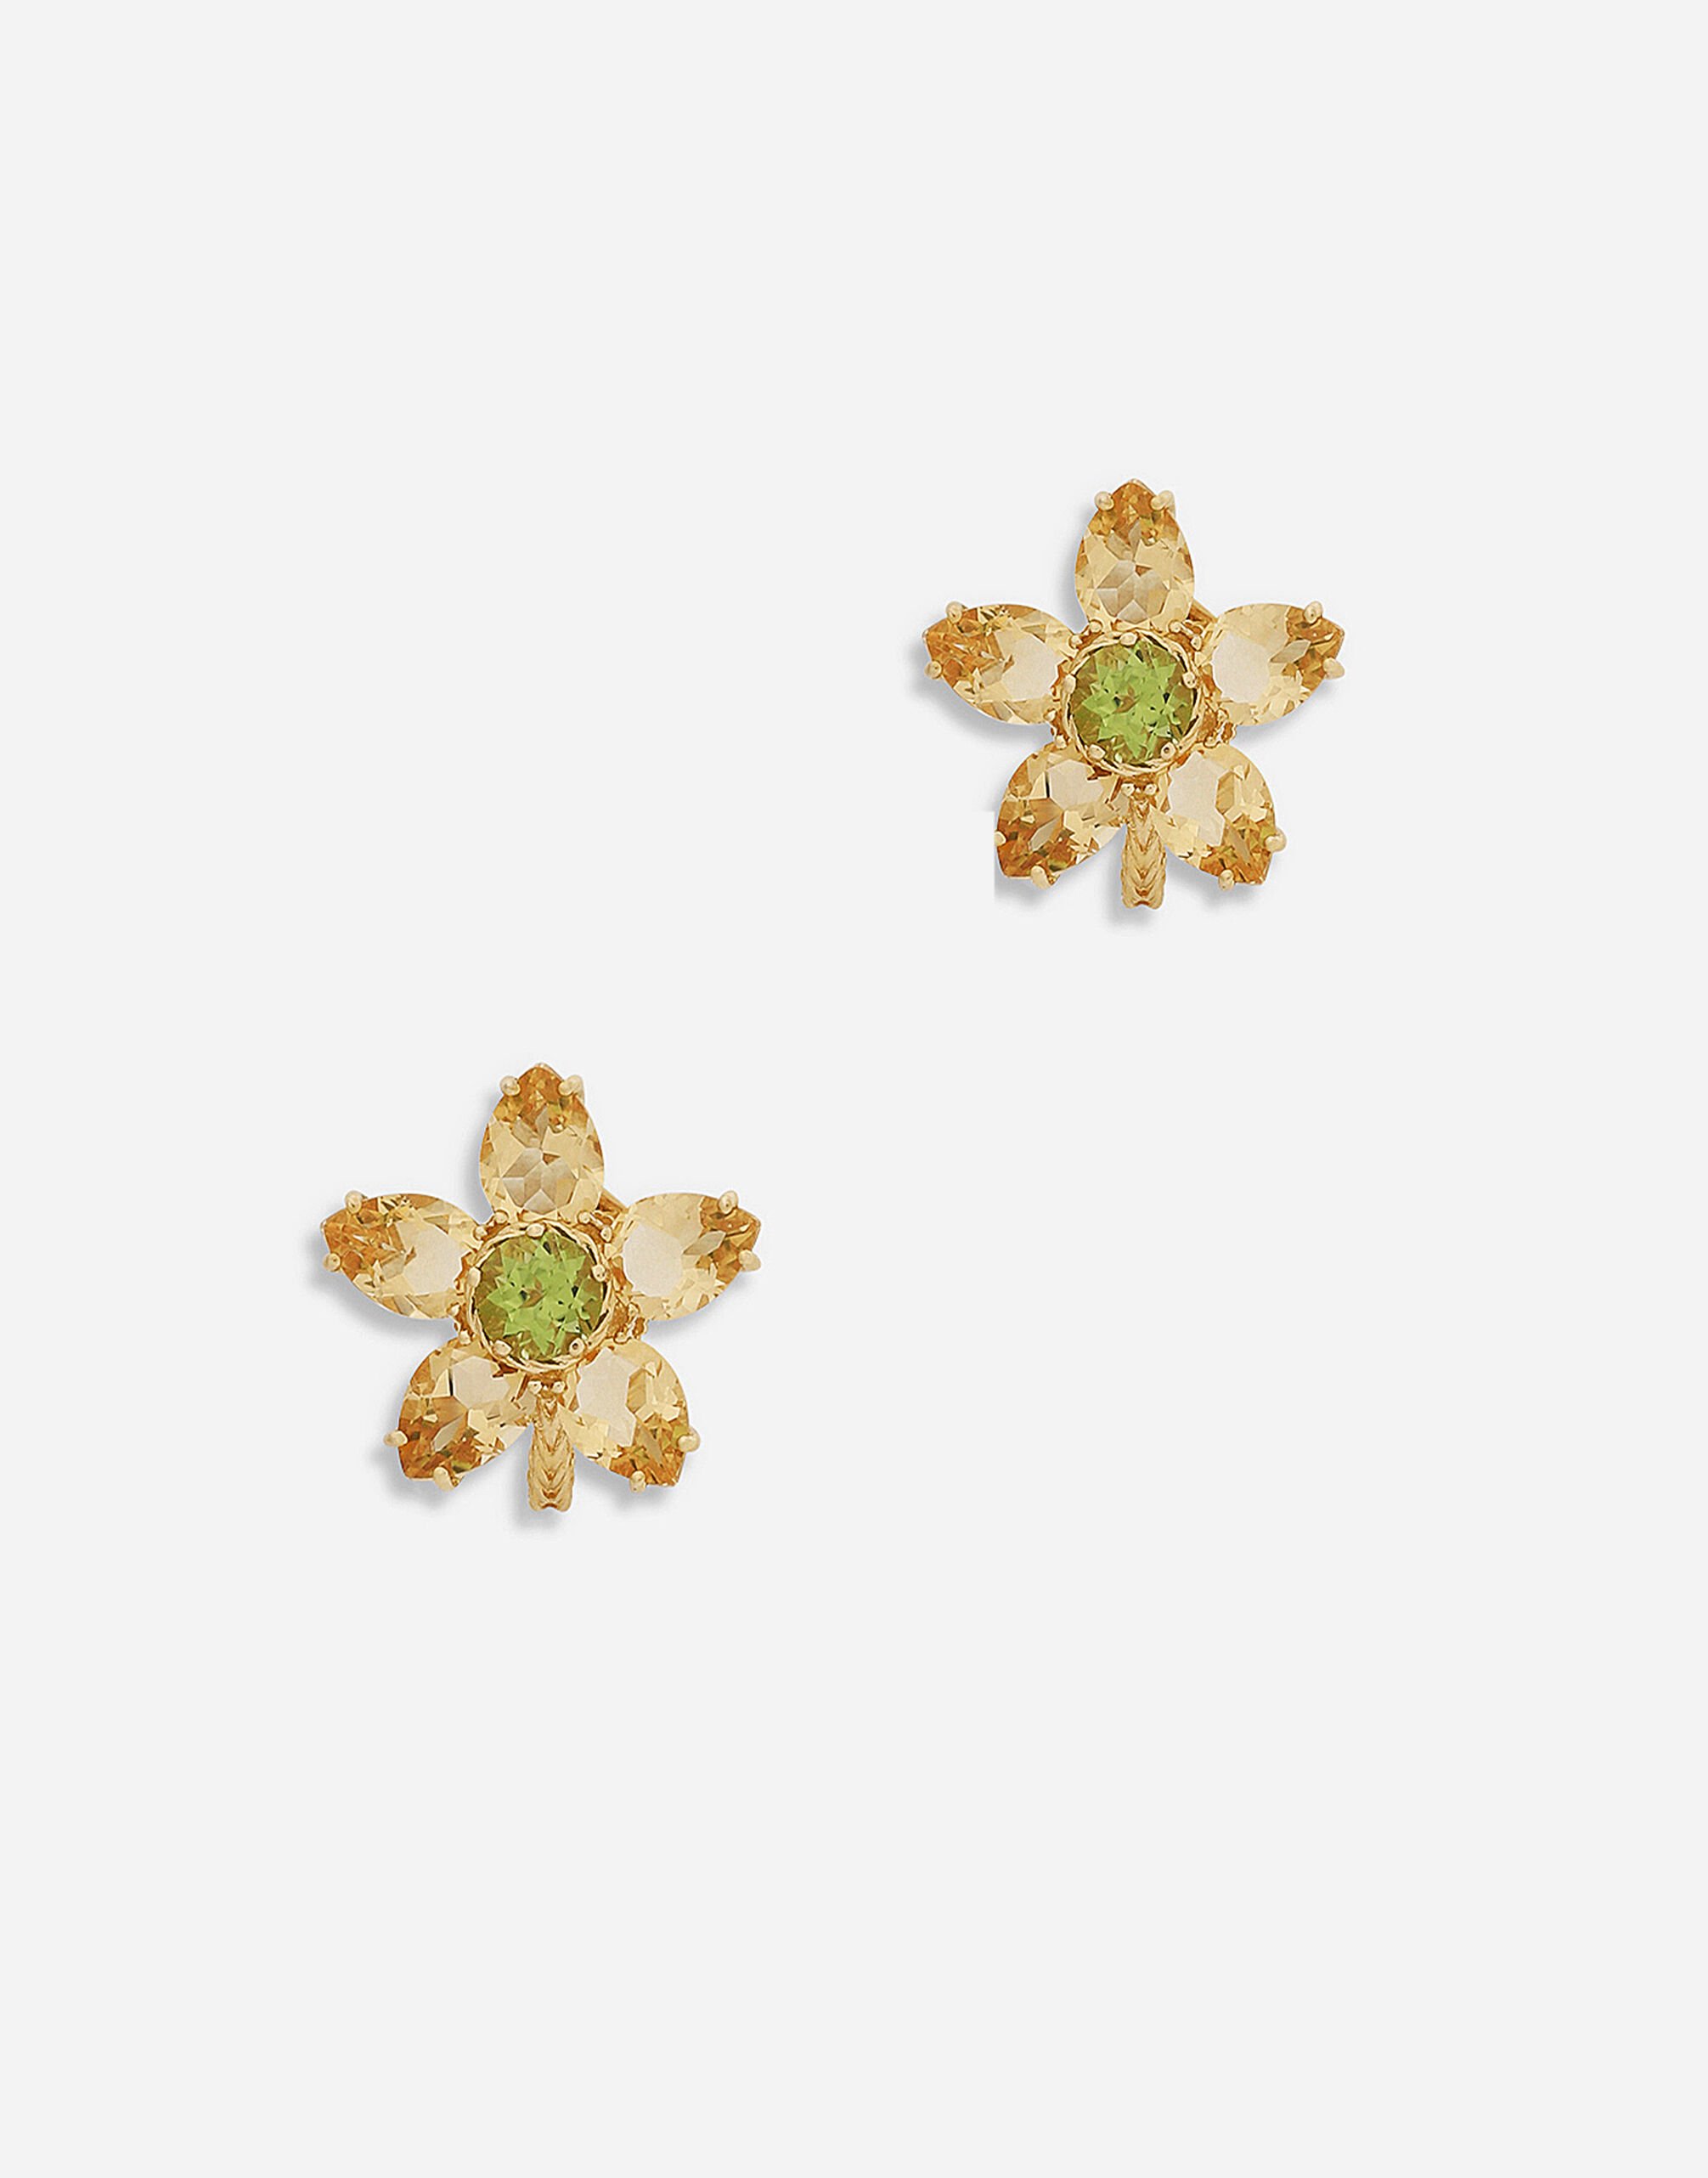 Dolce & Gabbana Spring earrings in yellow 18kt gold with citrine flower motif Weiss WEQD4GWPAVE